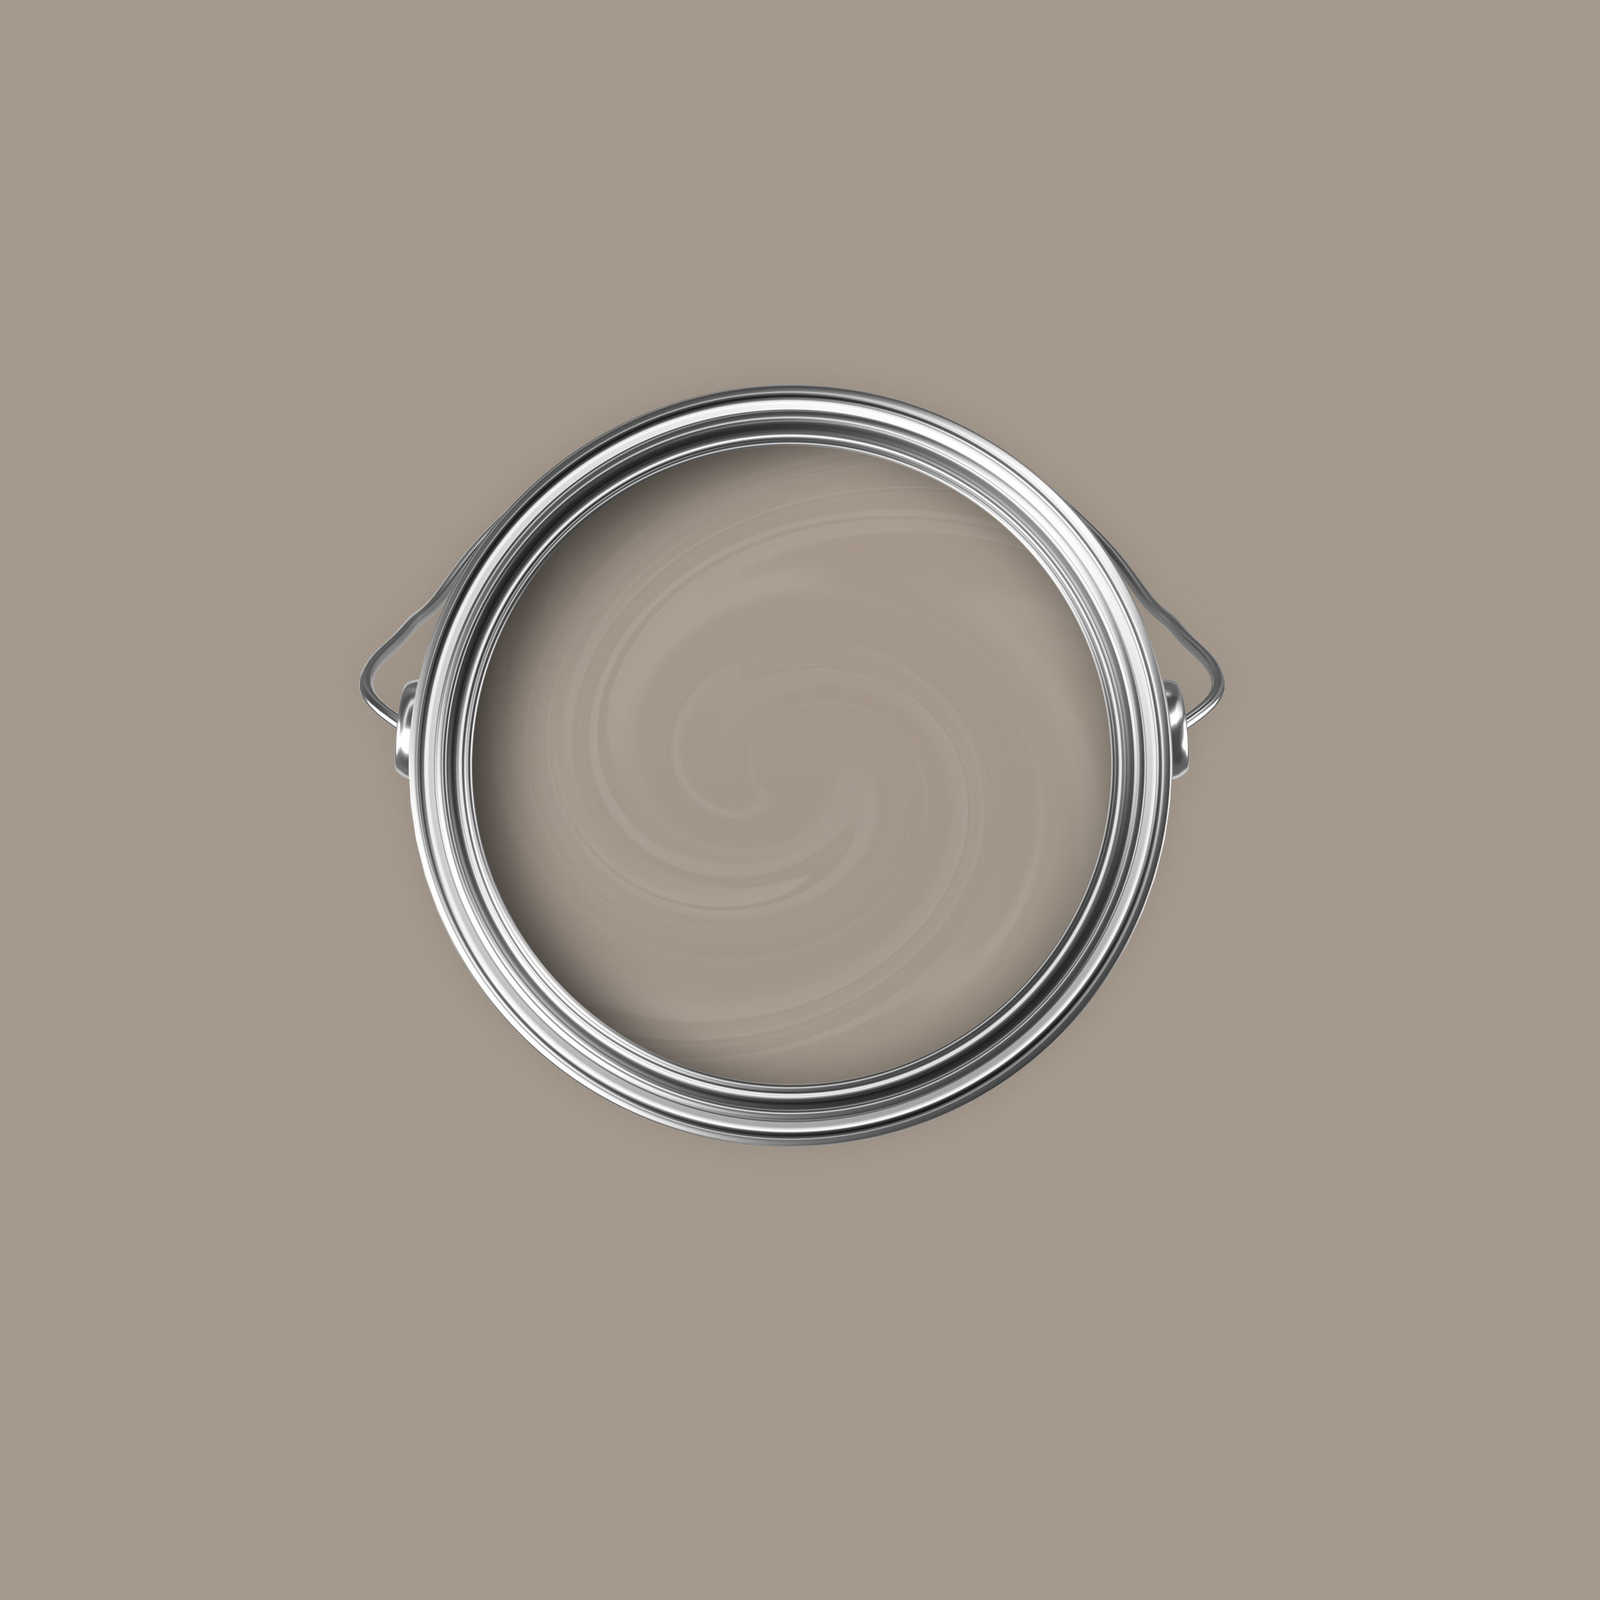             Premium Wall Paint Balanced Taupe »Talented calm taupe« NW701 – 2.5 litre
        